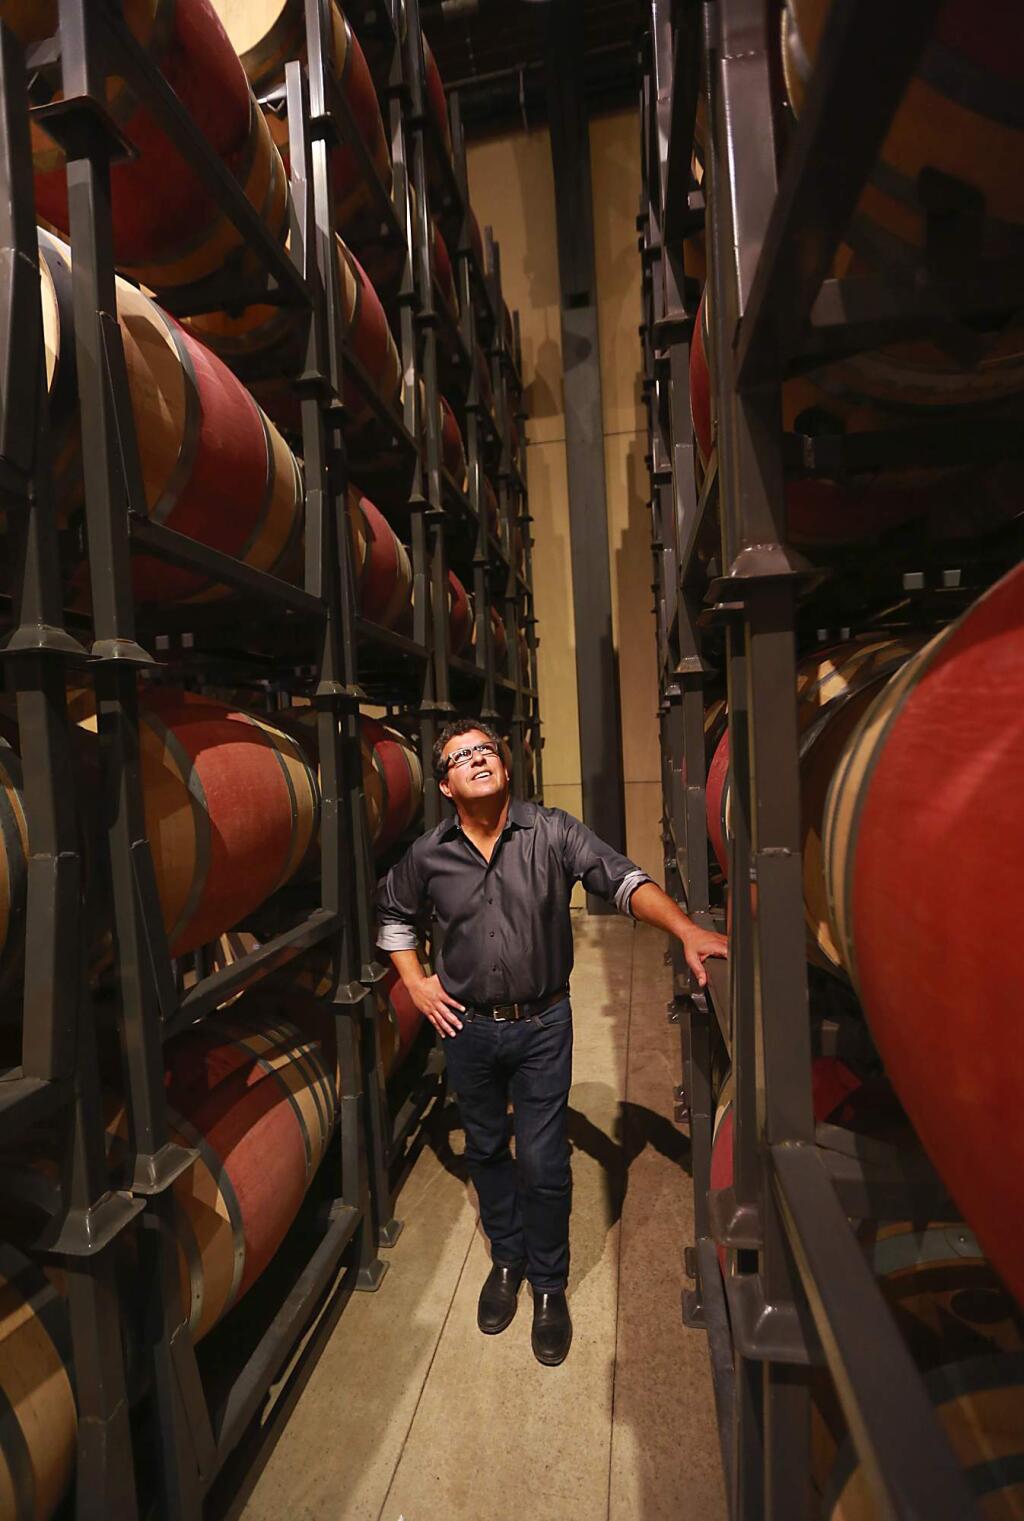 Bob Torres, principal and senior vice president of operations at Trinchero Family Estates, spent twice as much for his more stable barrel storage racks at the Napa Valley Winery.